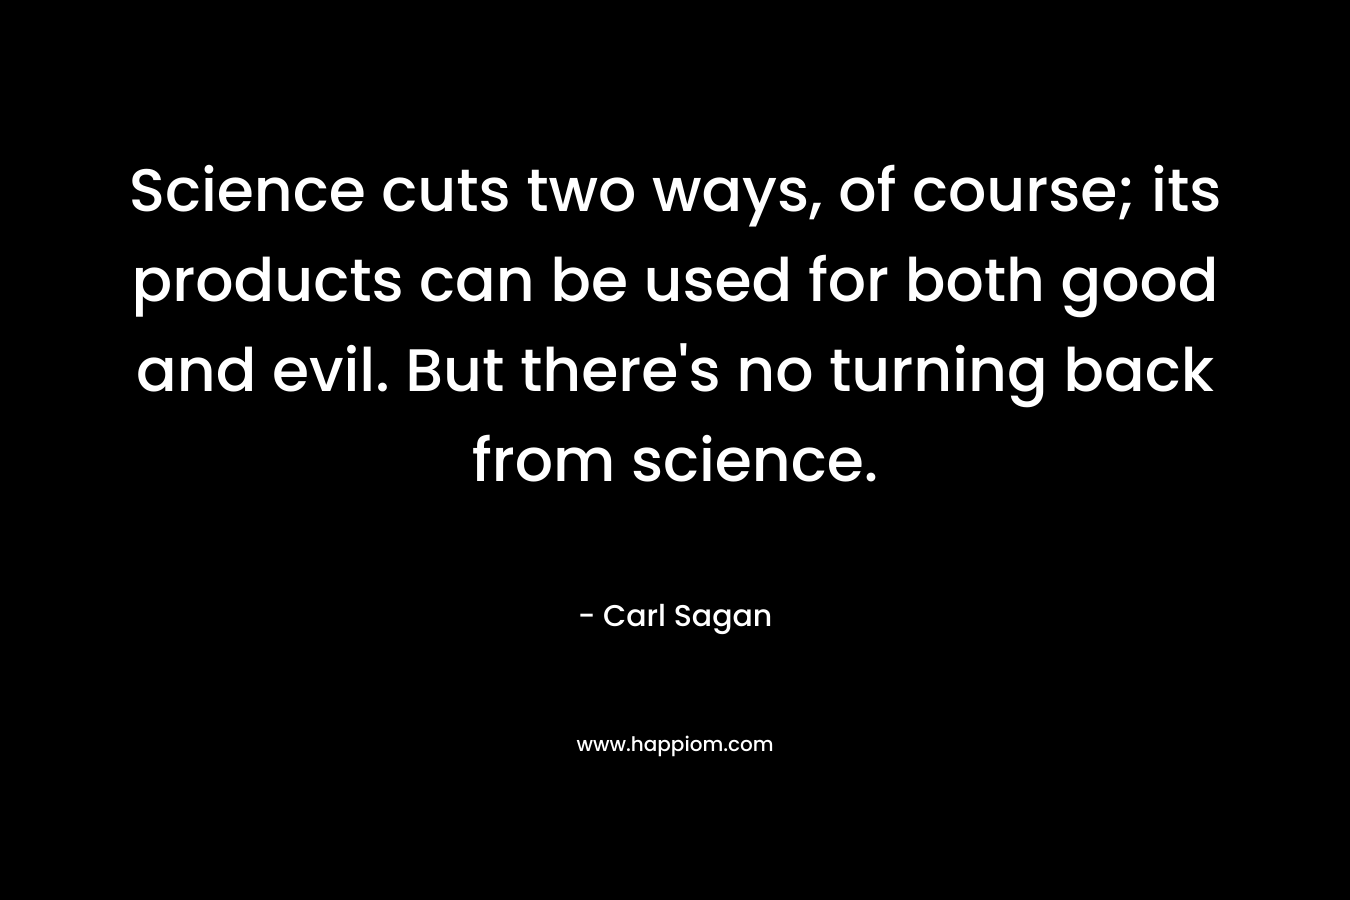 Science cuts two ways, of course; its products can be used for both good and evil. But there's no turning back from science.